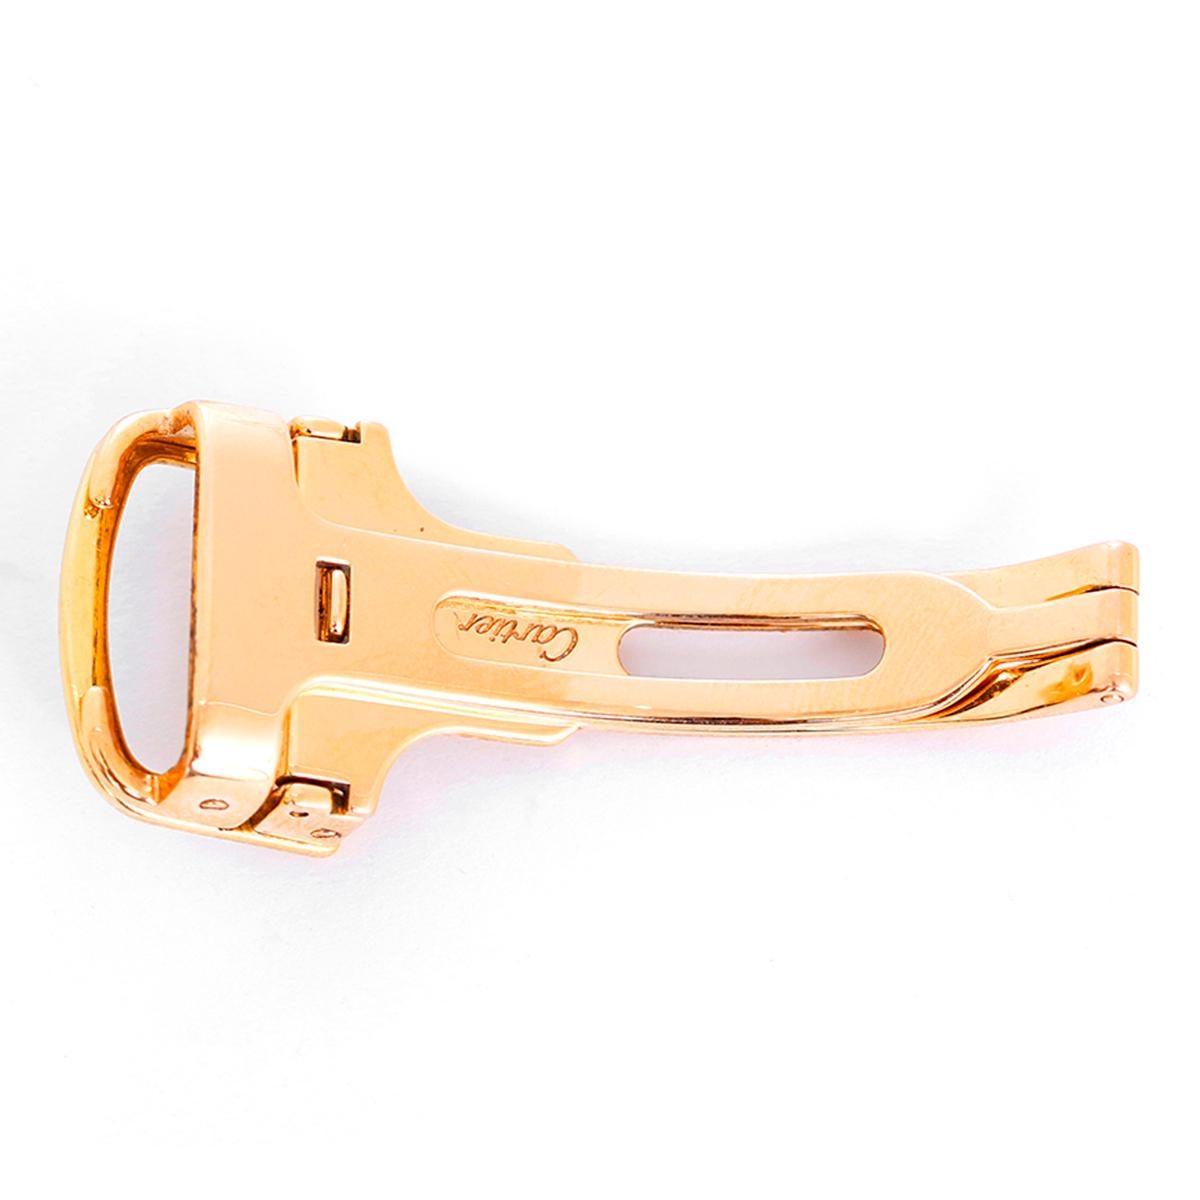 Cartier 18k Yellow Gold Deployant Clasp/Buckle 18mm - 18k yellow gold genuine Cartier 18mm deployant clasp/buckle.